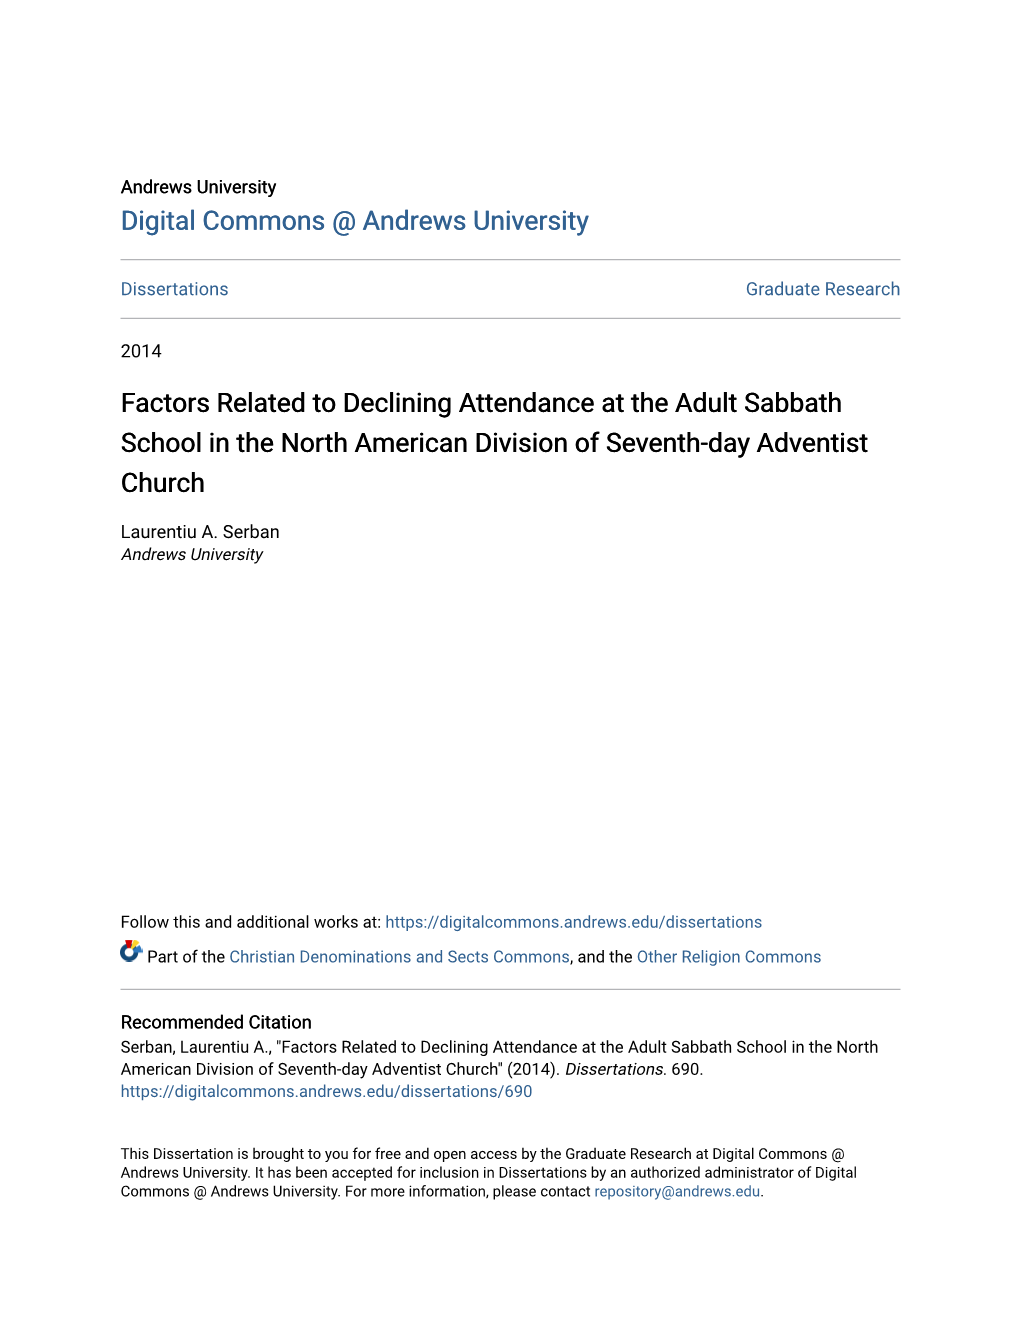 Factors Related to Declining Attendance at the Adult Sabbath School in the North American Division of Seventh-Day Adventist Church